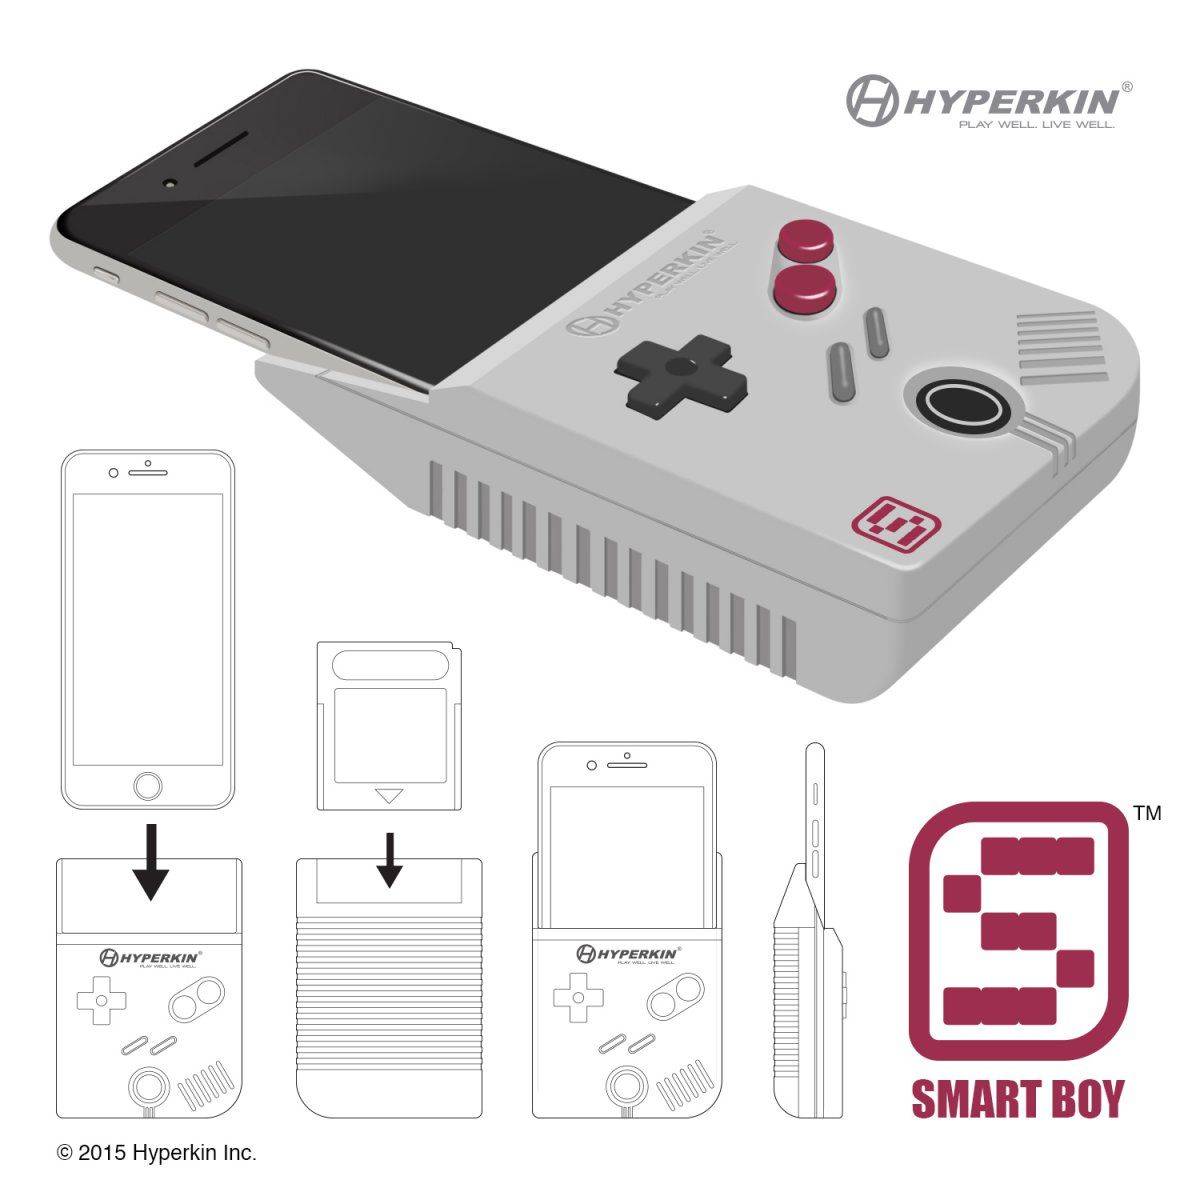 This iPhone 6 Plus case promises to actually play Game Boy games